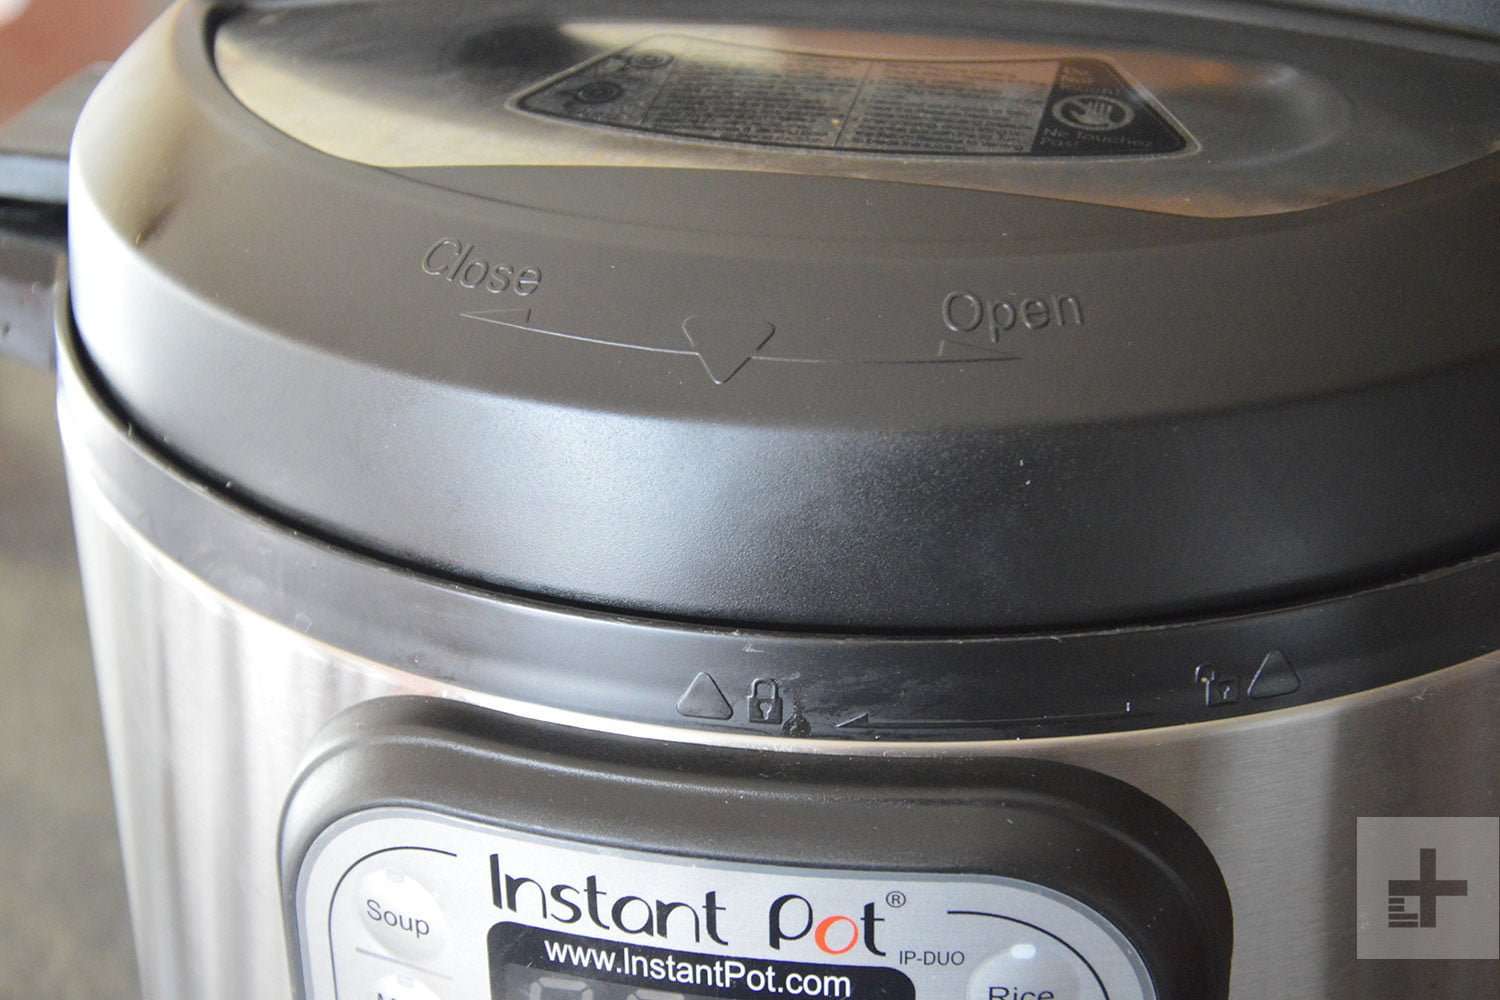 The Best Instant Pots You Can Buy in 2019